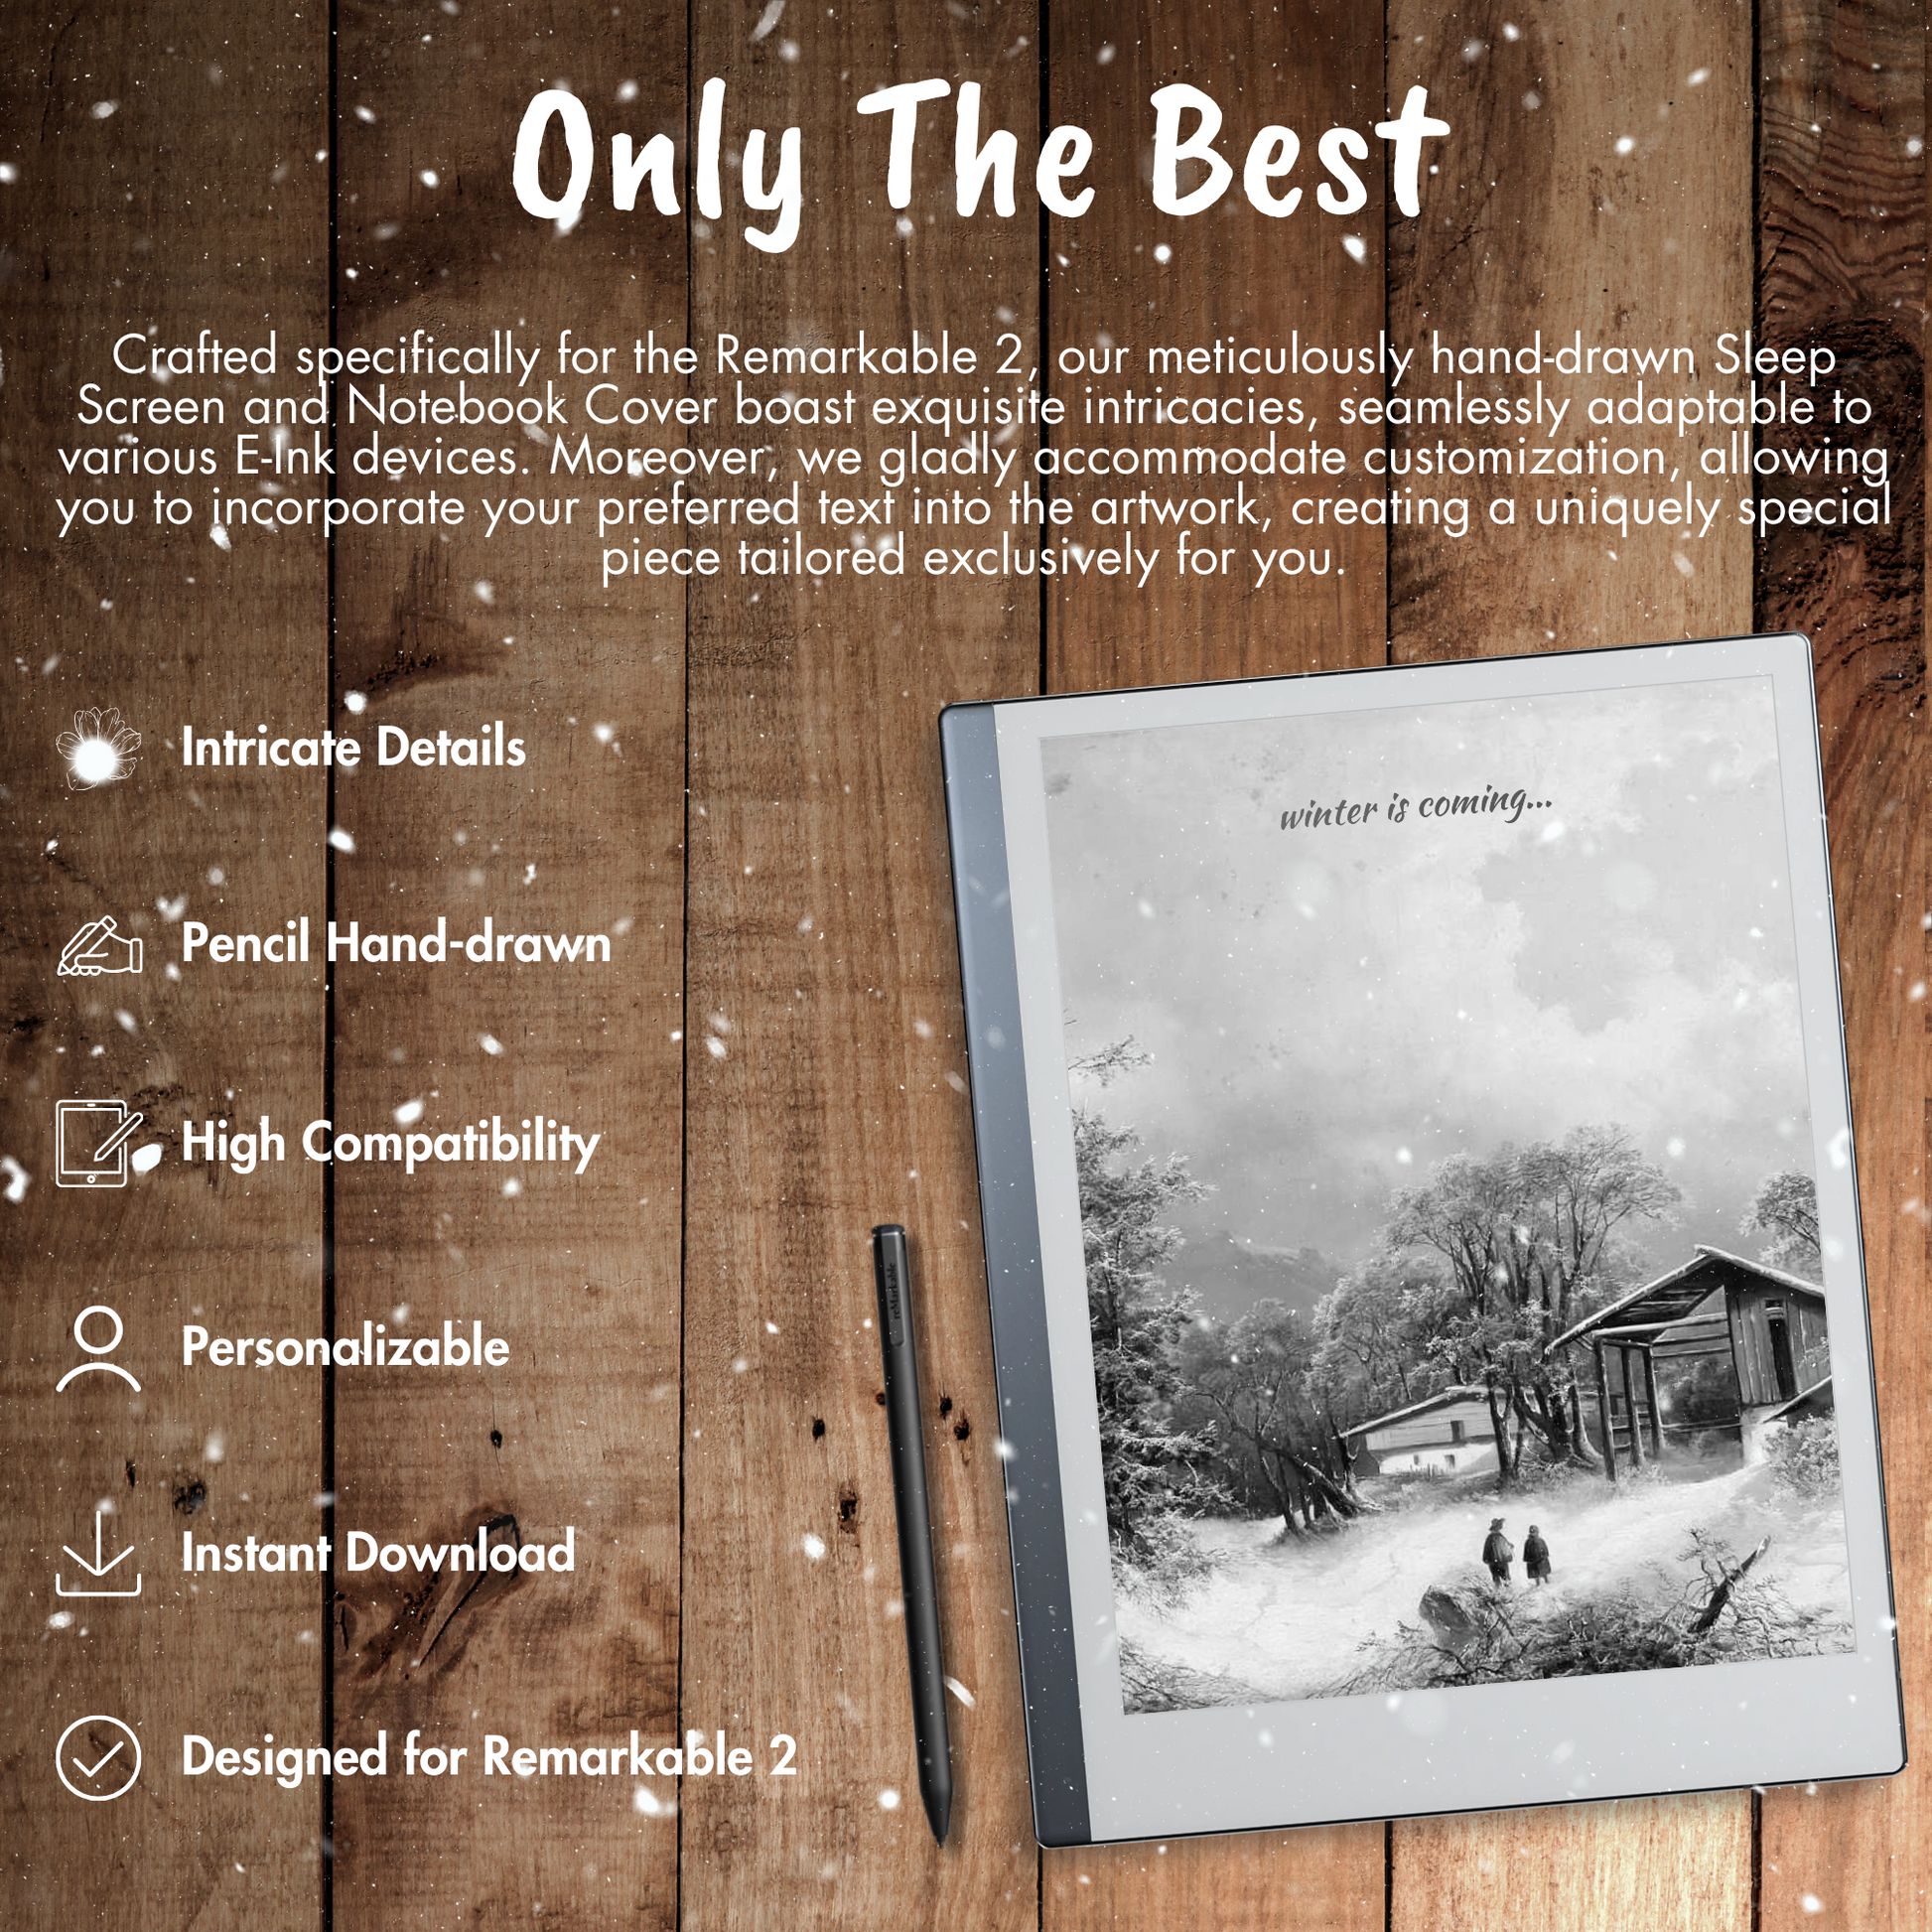 Elevate your Christmas cheer with our PREMIUM Remarkable 2 Sleep Screen & Notebook Cover Artwork. Instantly download personalized, intricately detailed hand-drawn images that beautifully capture the enchantment of the season. Customize your sleep experience with heartwarming scenes, ensuring a cozy and delightful rest during this joyful time of the year.